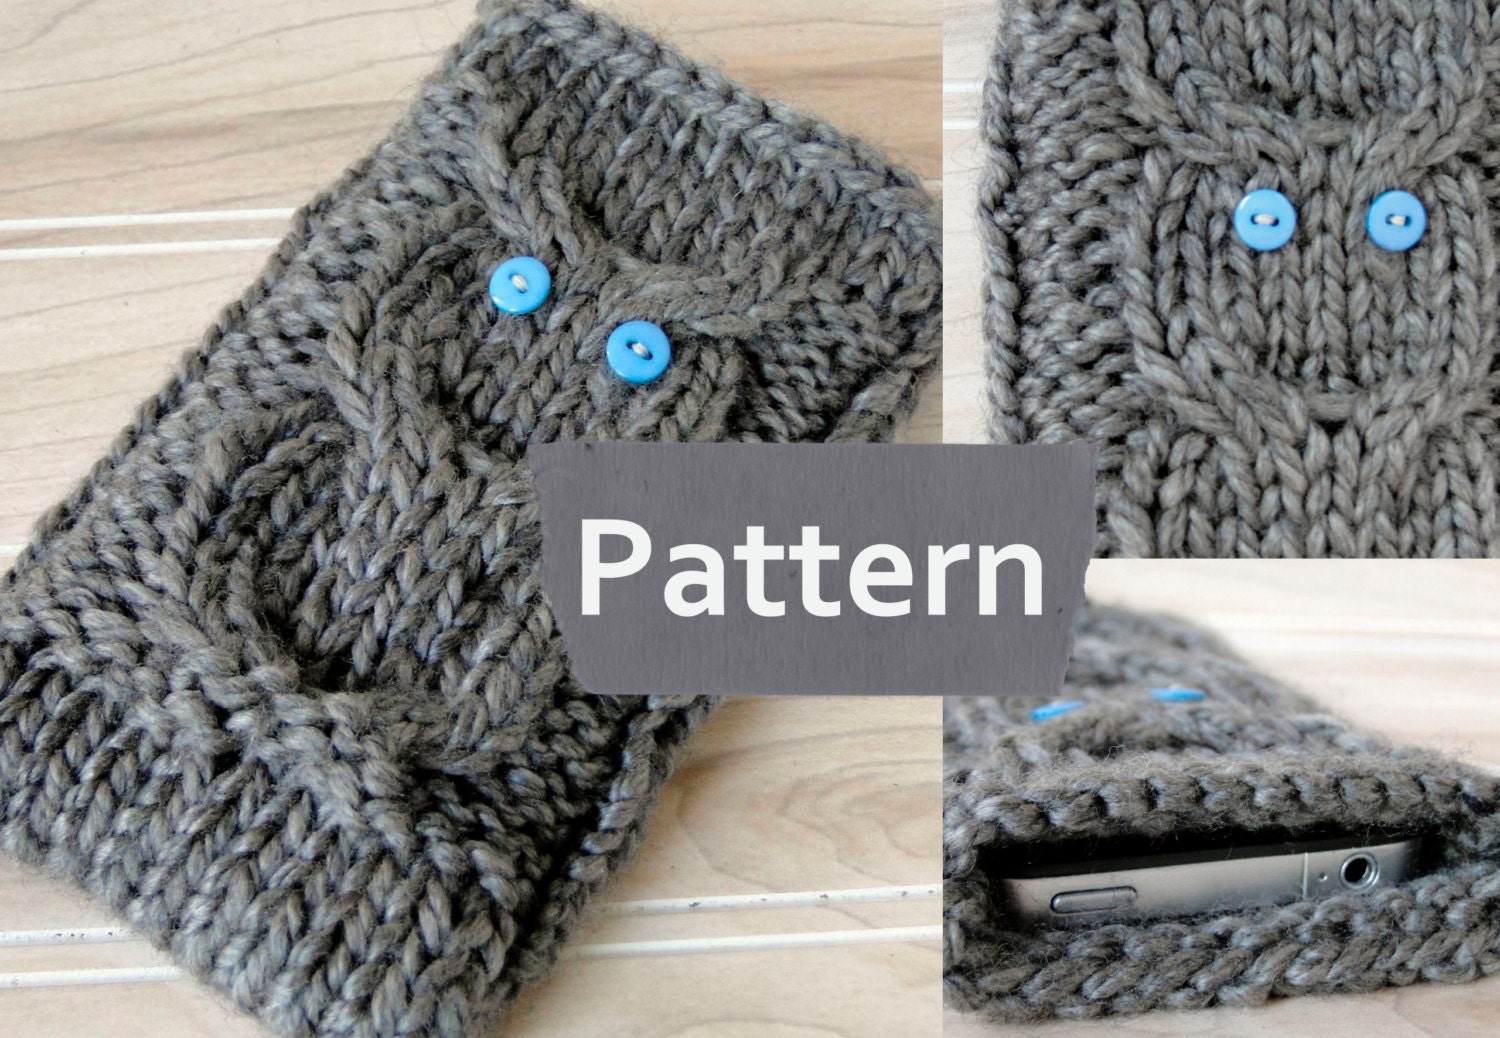 PDF PATTERN Instant Download Knit Iphone 5 Owl cozyknit